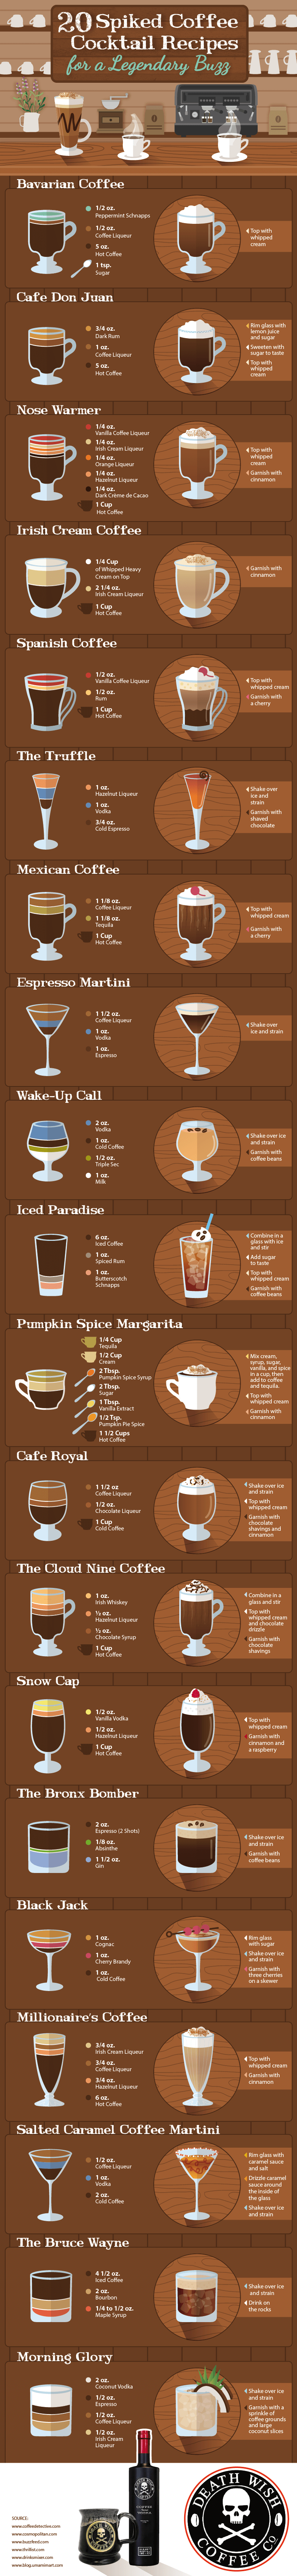 20 Spiked Coffee Cocktail Recipes for a Legendary Buzz